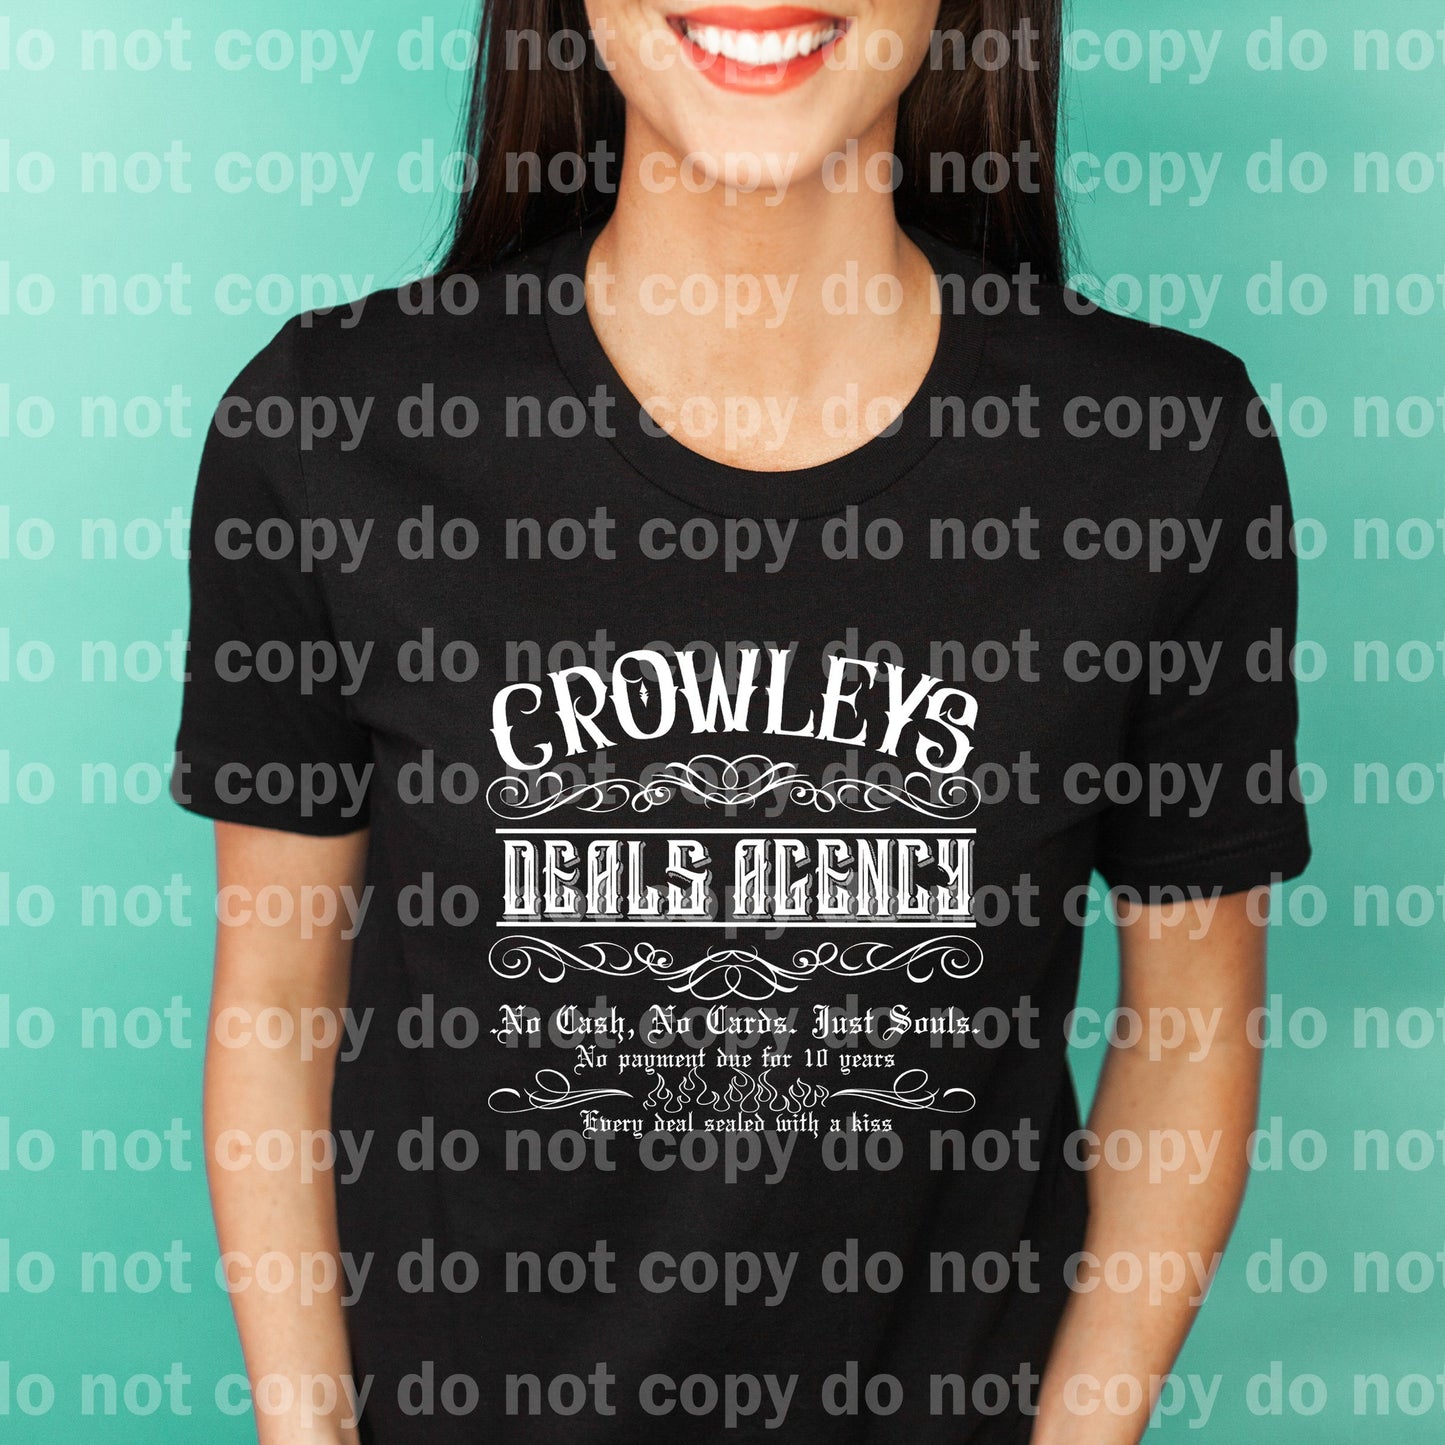 Crowley's Deals Agency Black/Red/White with Pocket Option Dream Print or Sublimation Print